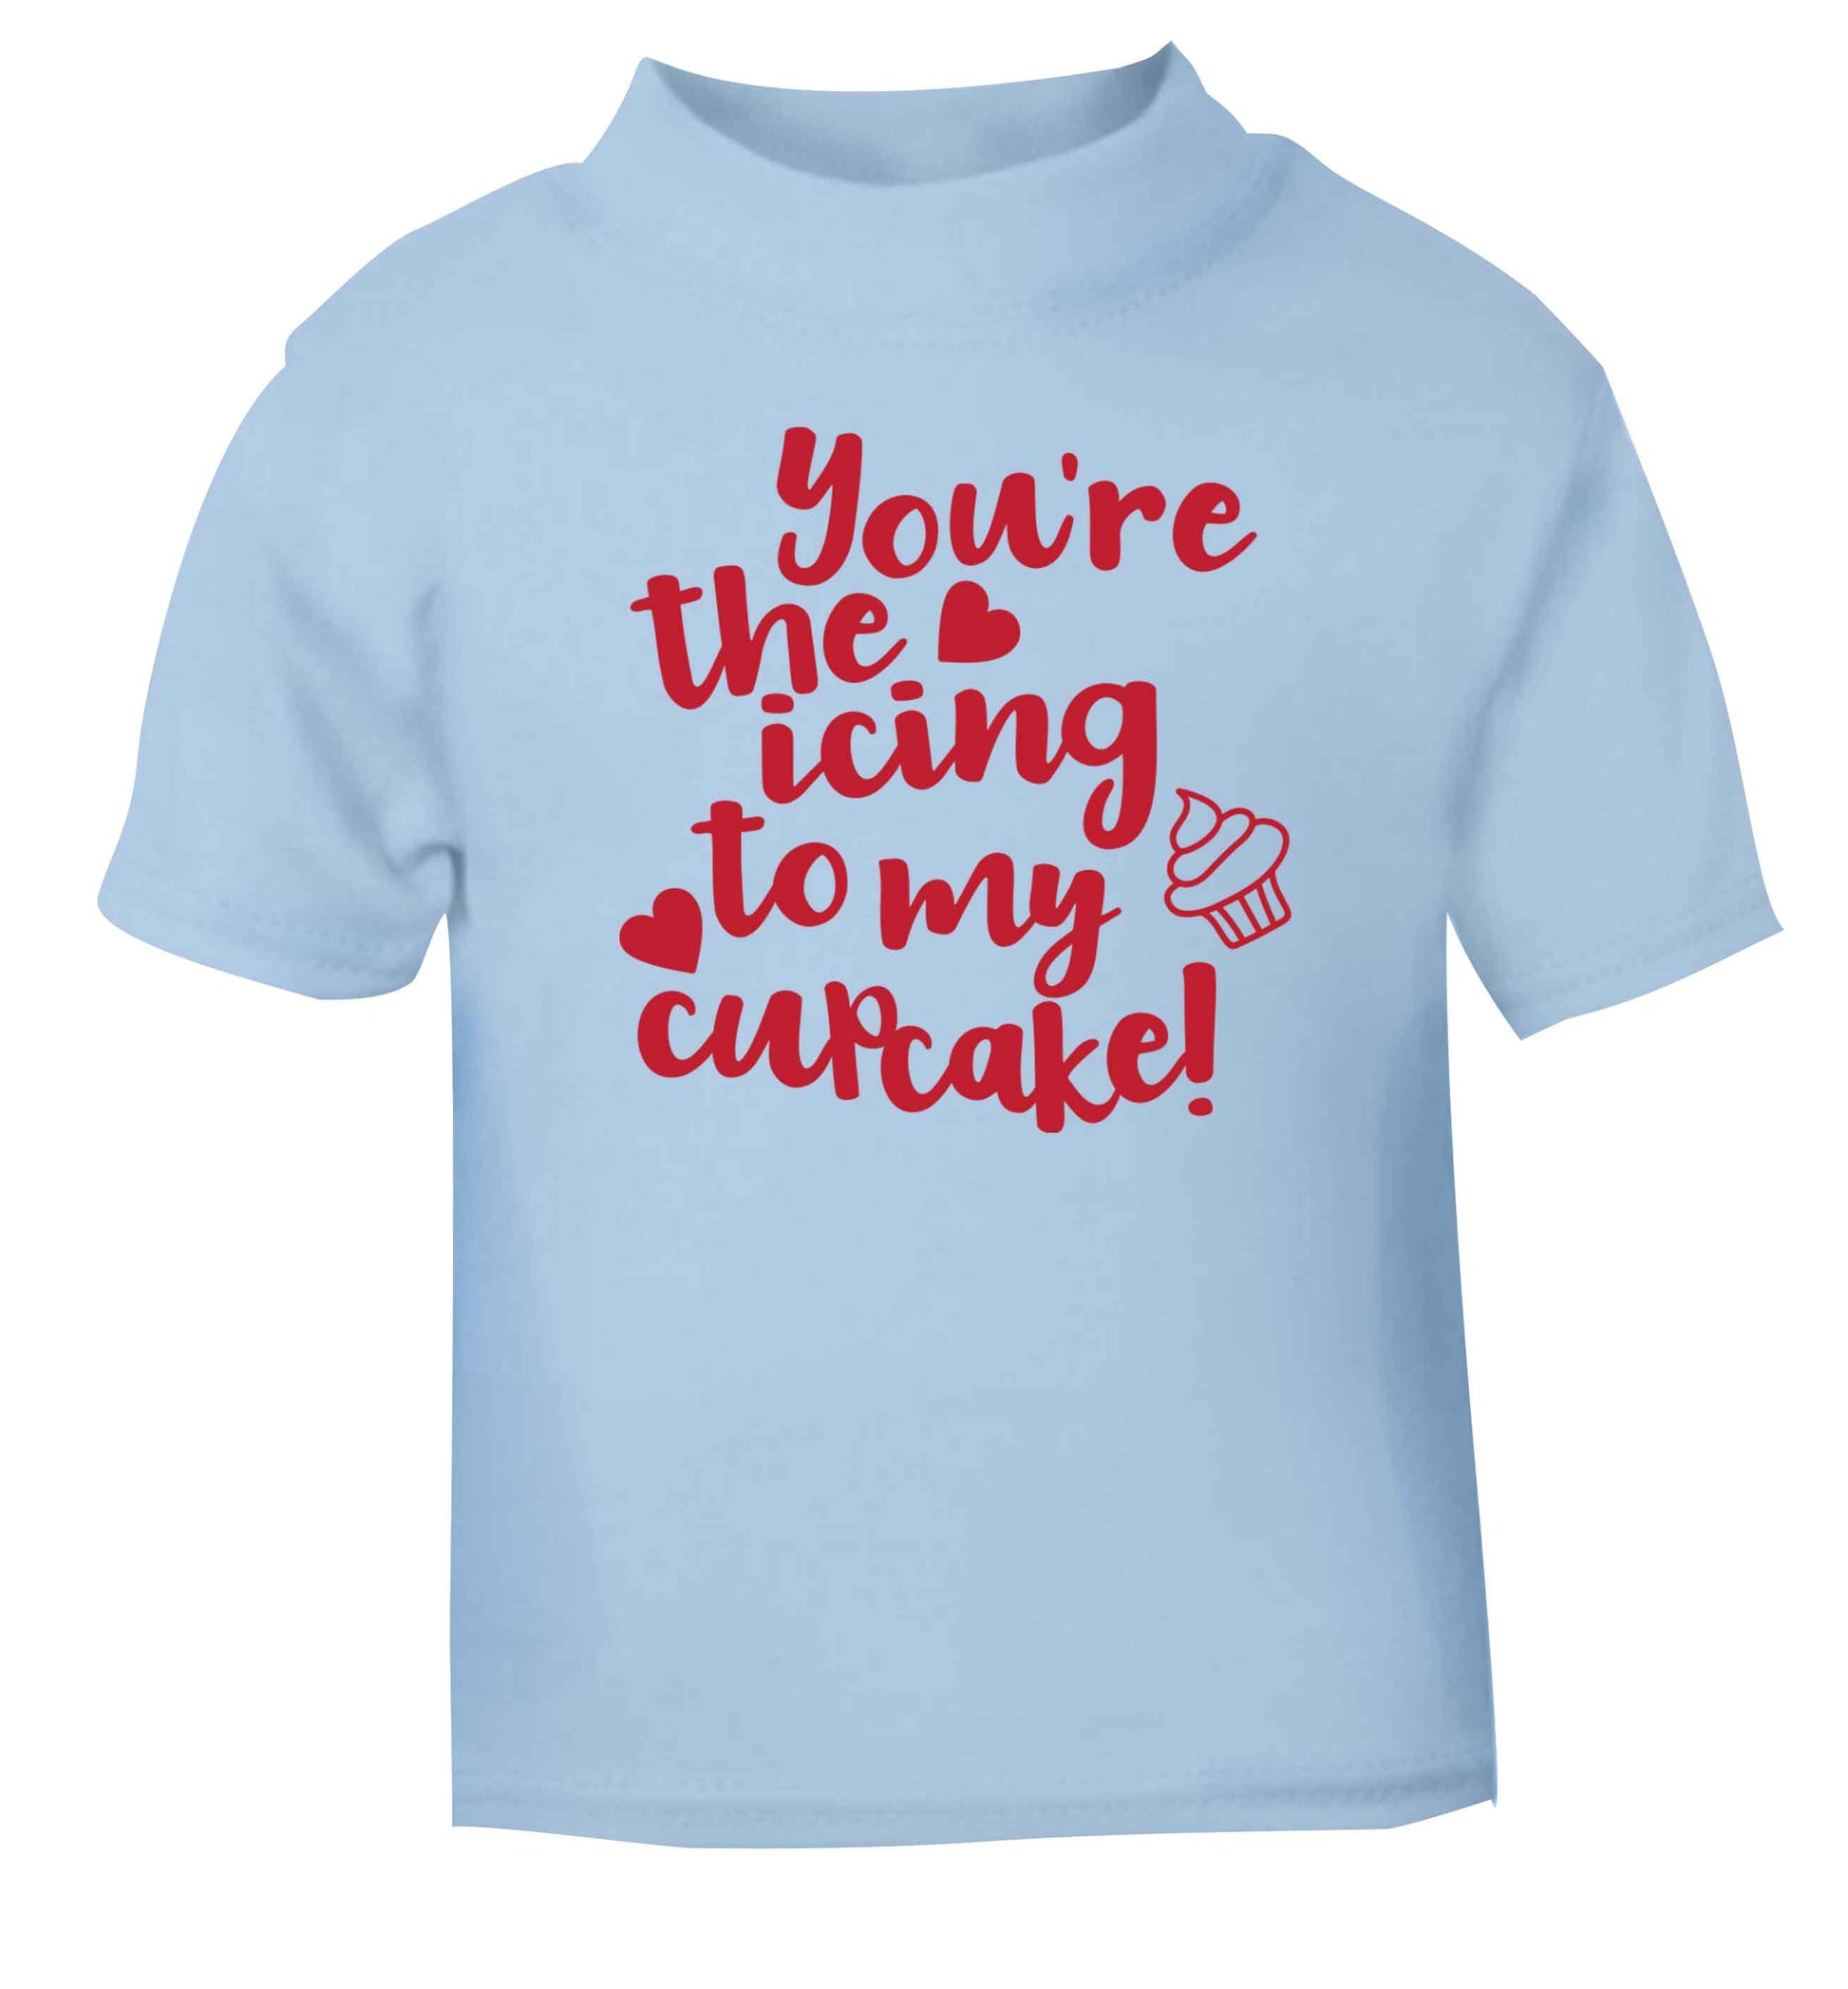 You're the icing to my cupcake light blue Baby Toddler Tshirt 2 Years